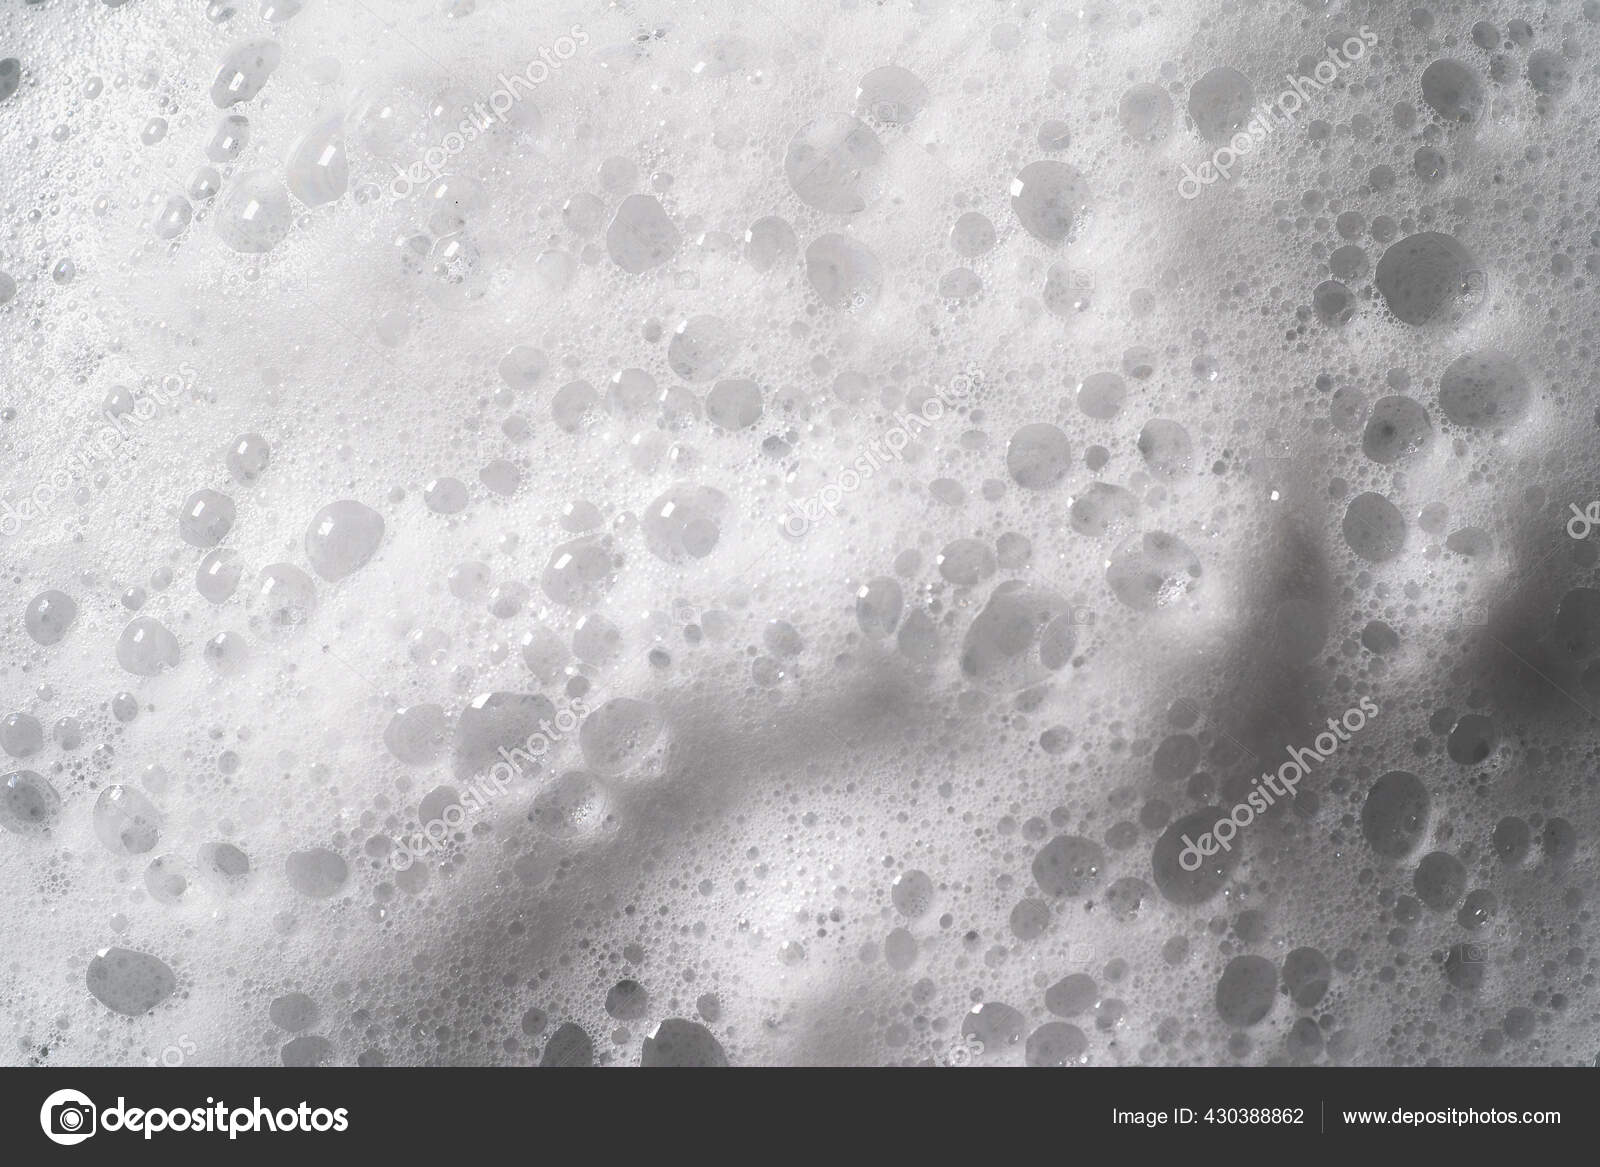 White foam with bubbles texture, soap, detergent or shampoo or